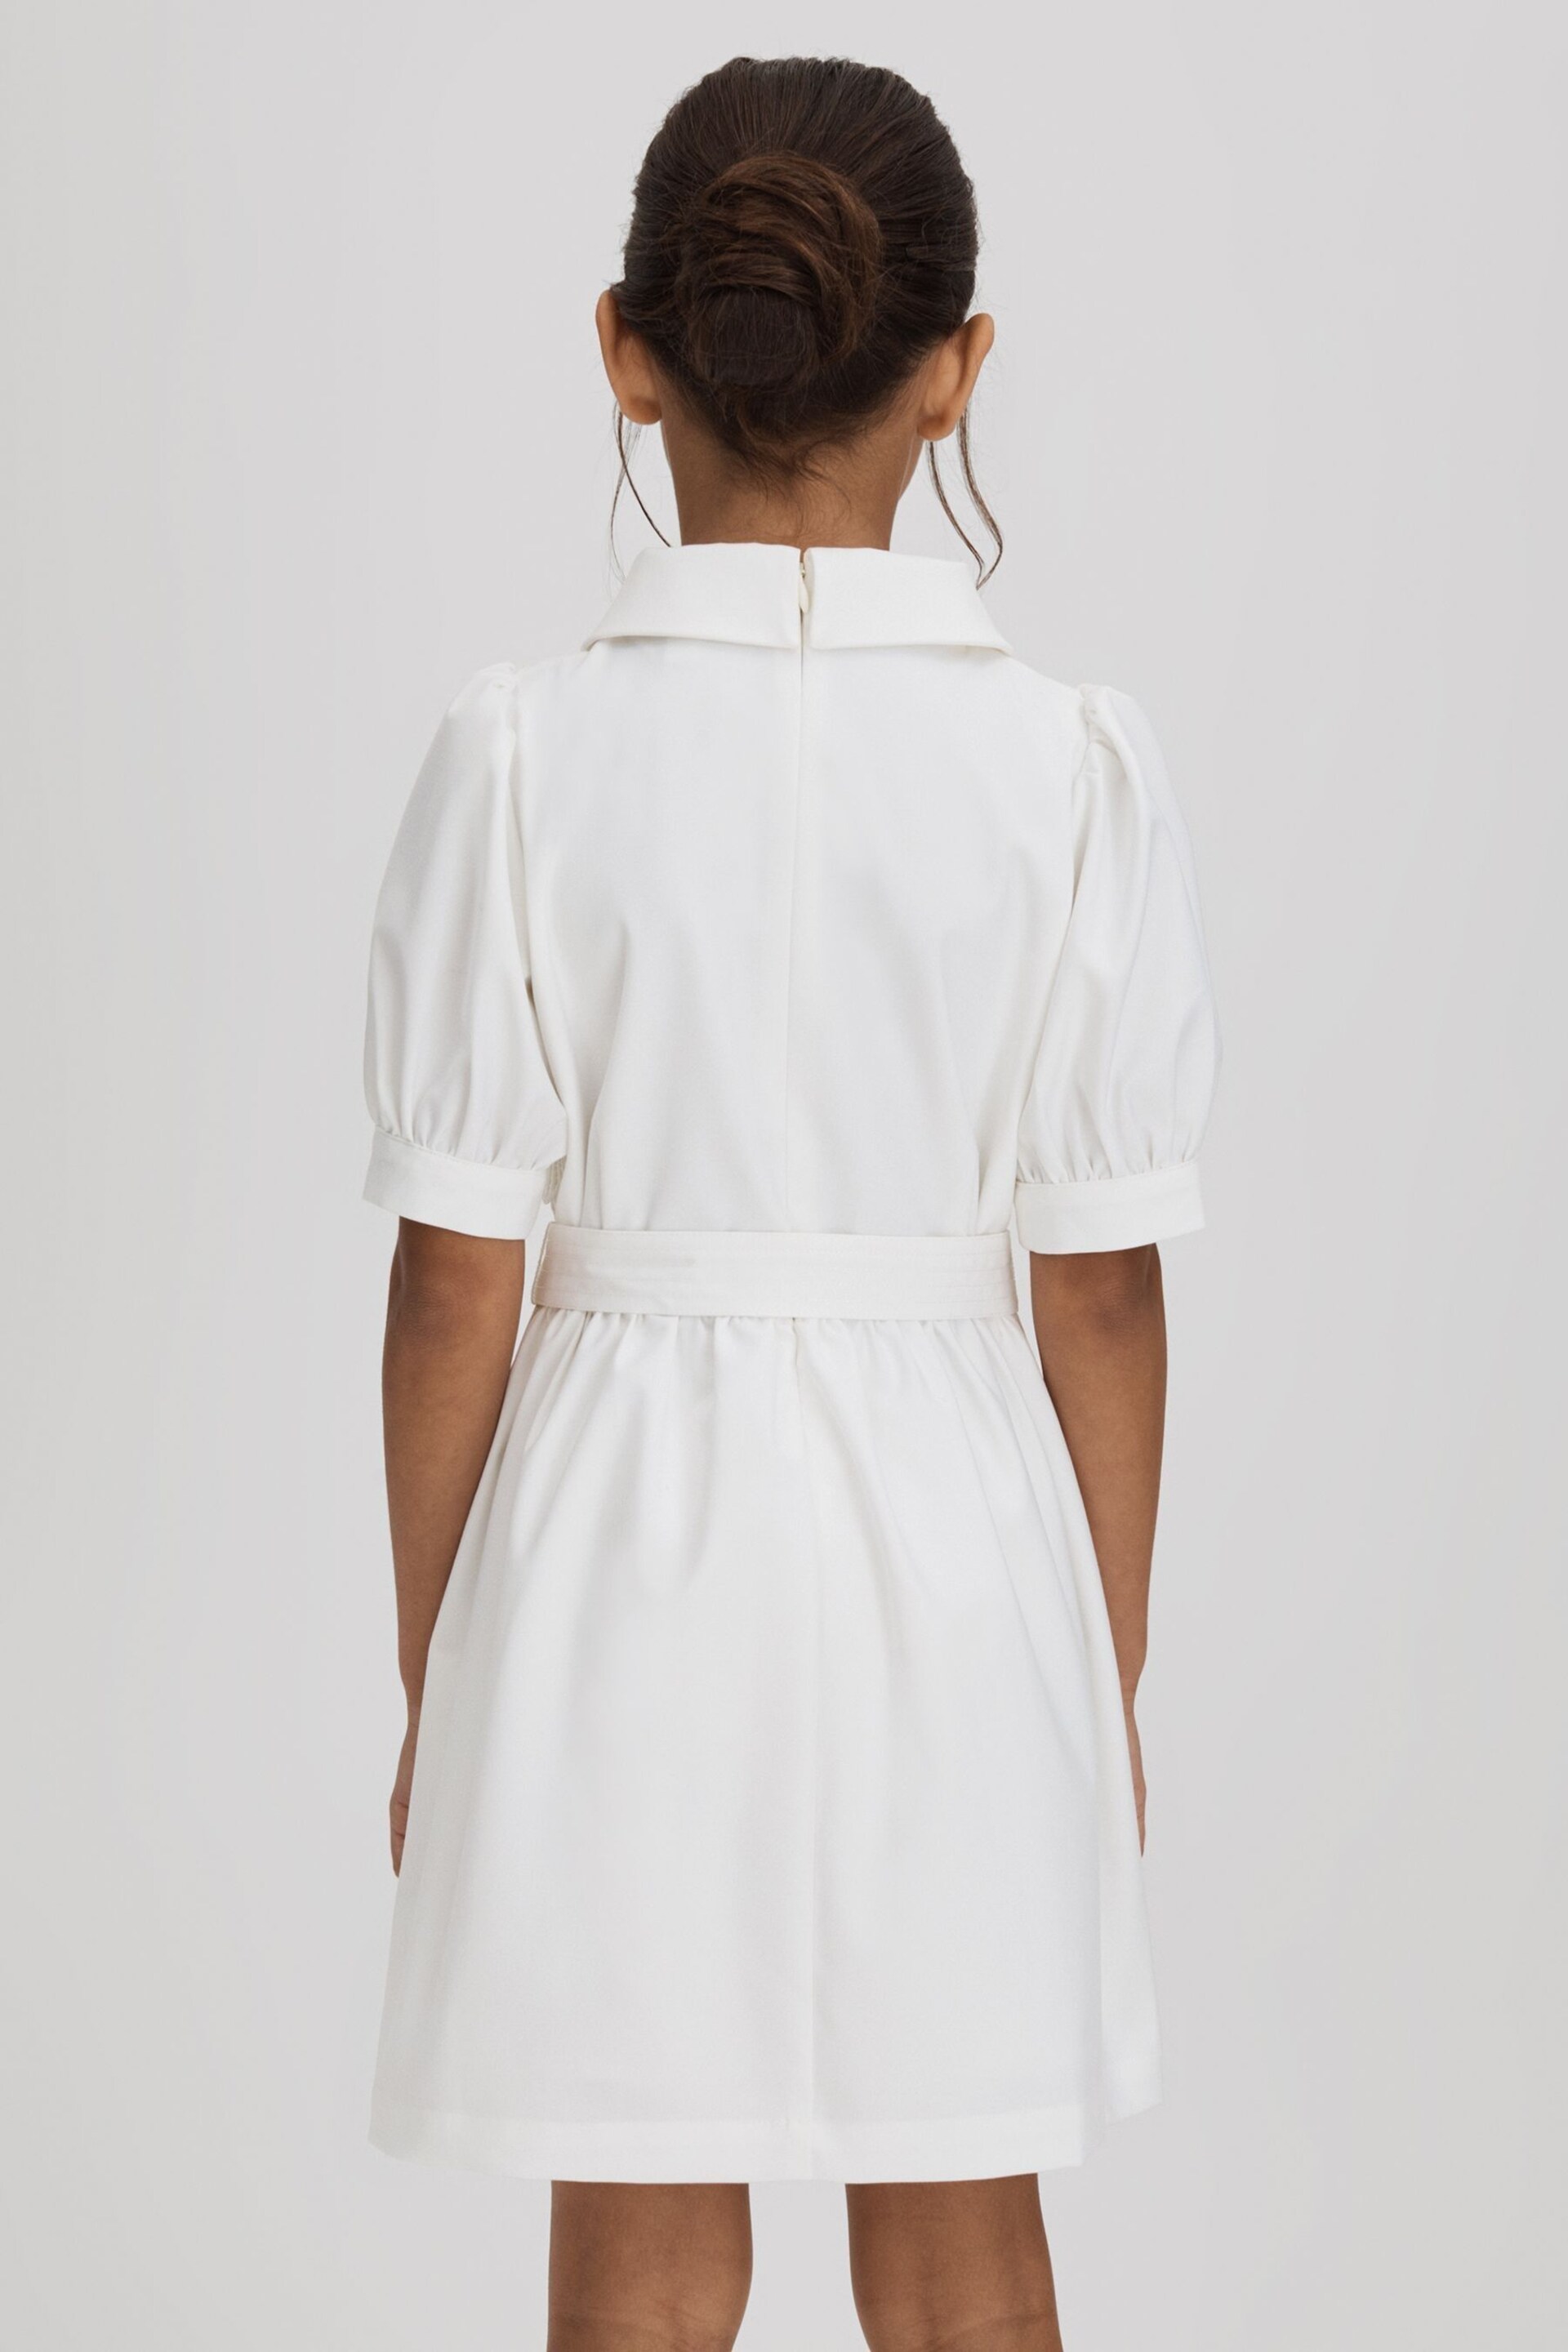 Reiss Ivory Dannie Junior Embroidered Puff Sleeve Dress - Image 5 of 6